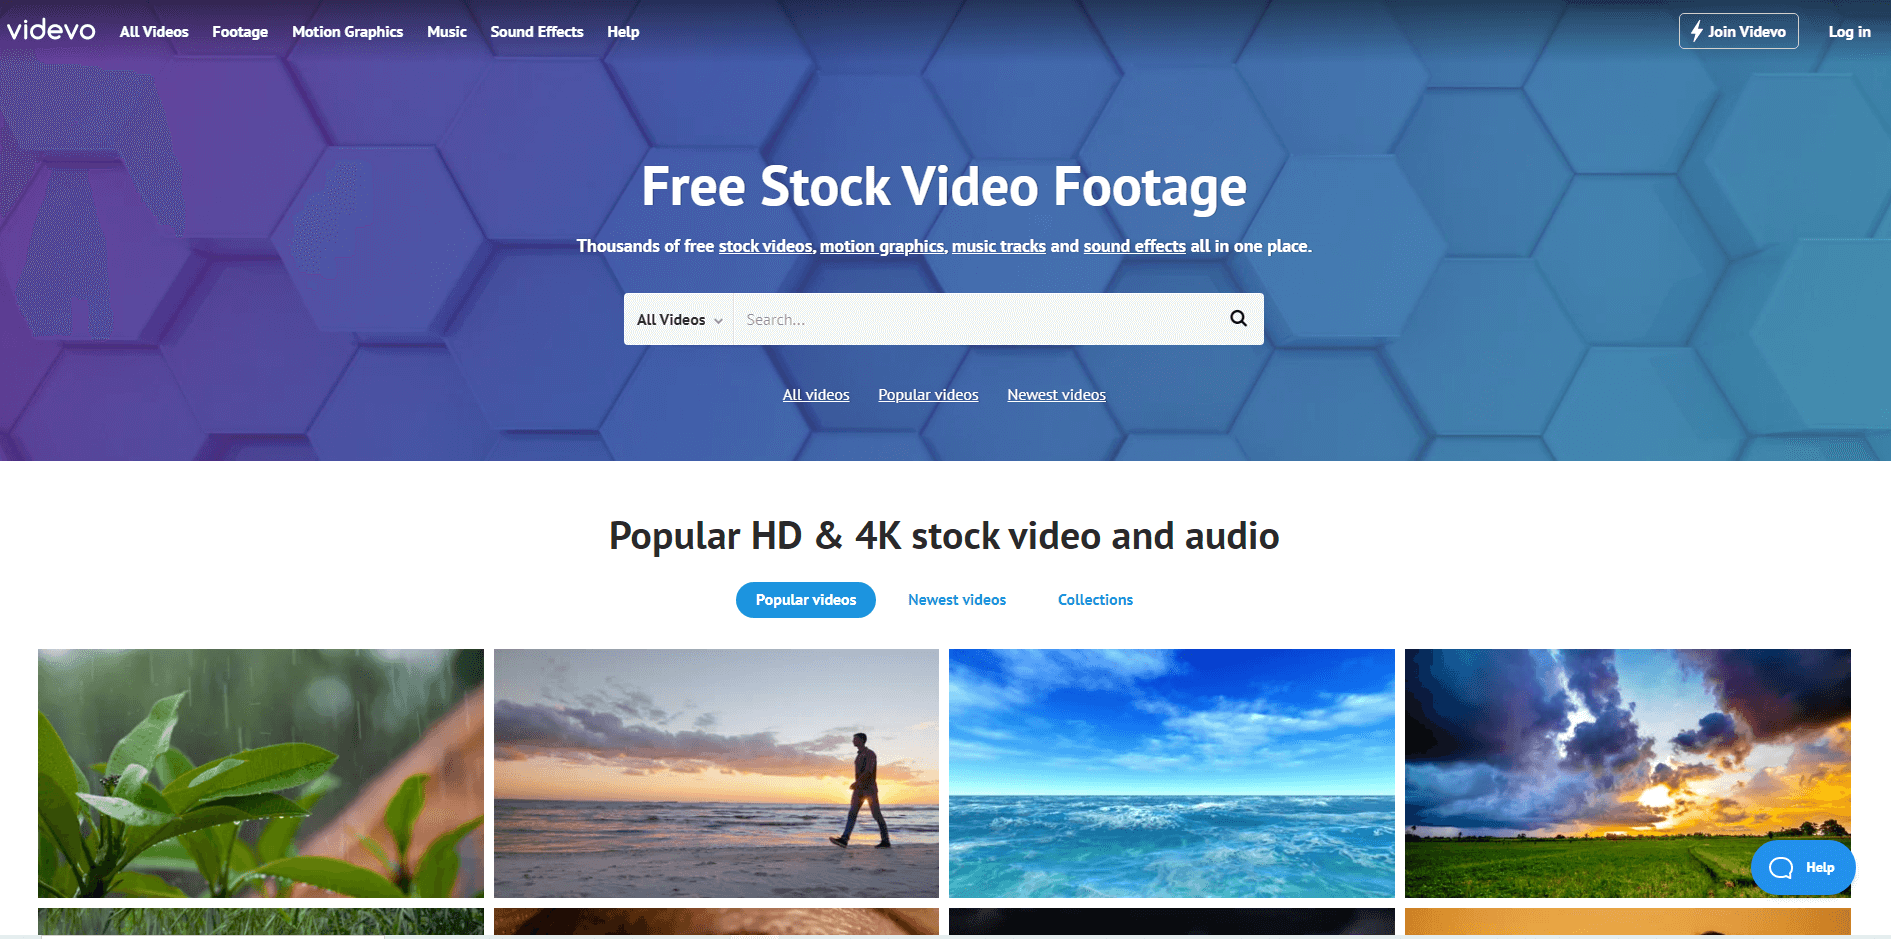 HD and 4k stock footage